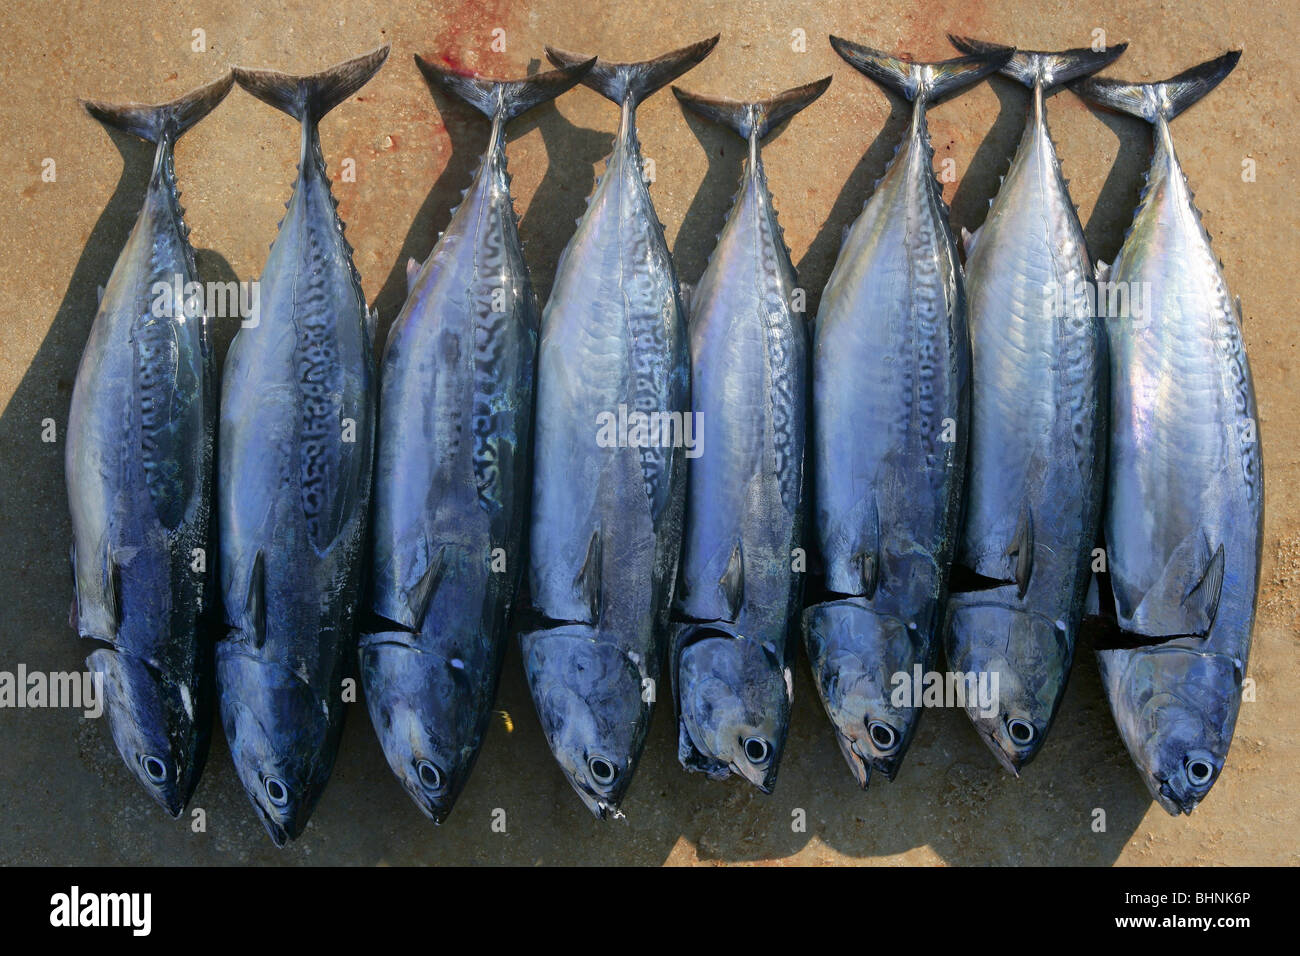 Auxis thazard fish in a row frigate tuna sport fishing catch Stock Photo